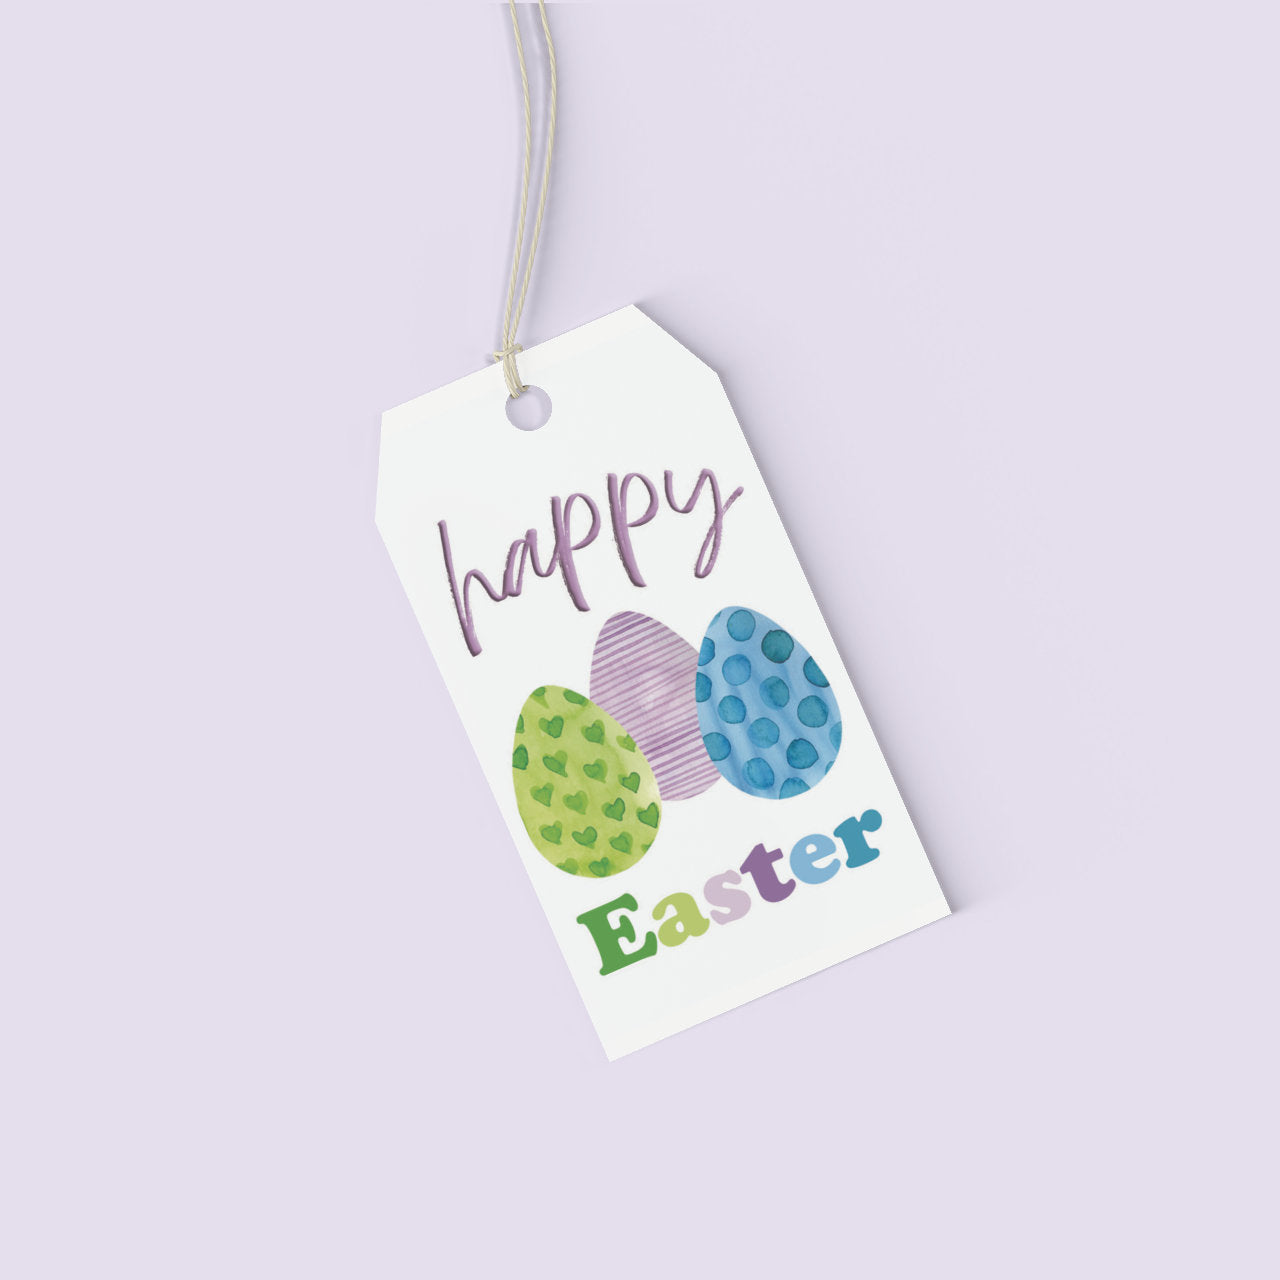 HAPPY EASTER gift tag - Printable instant download Easter eggs hang tag